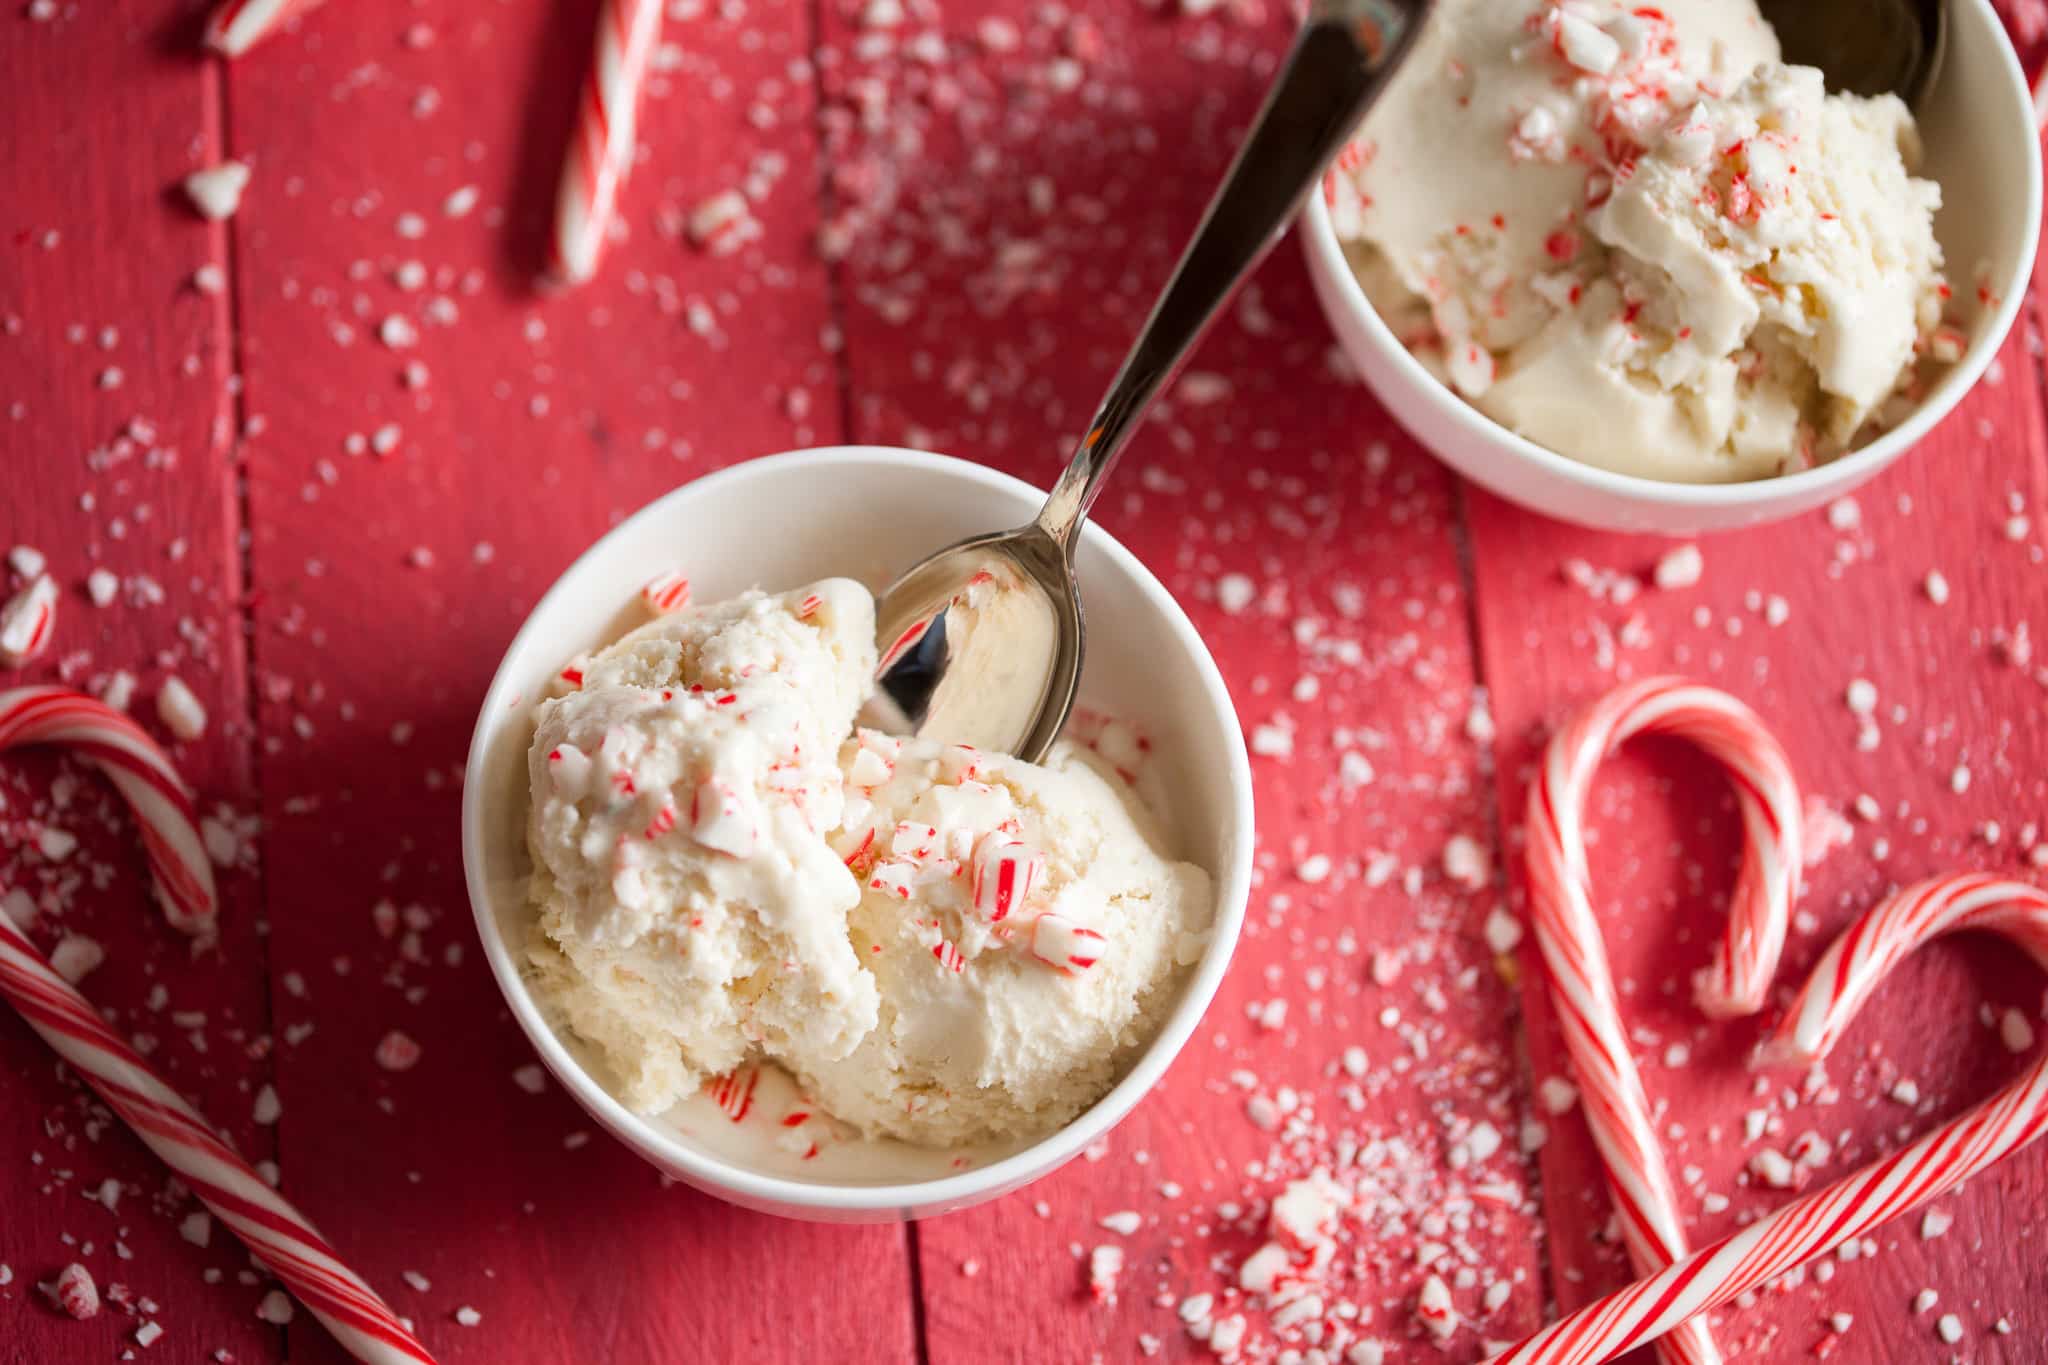 This homemade peppermint candy cane ice cream is the most wonderful holiday treat, it's especially delicious when enjoyed with brownies!